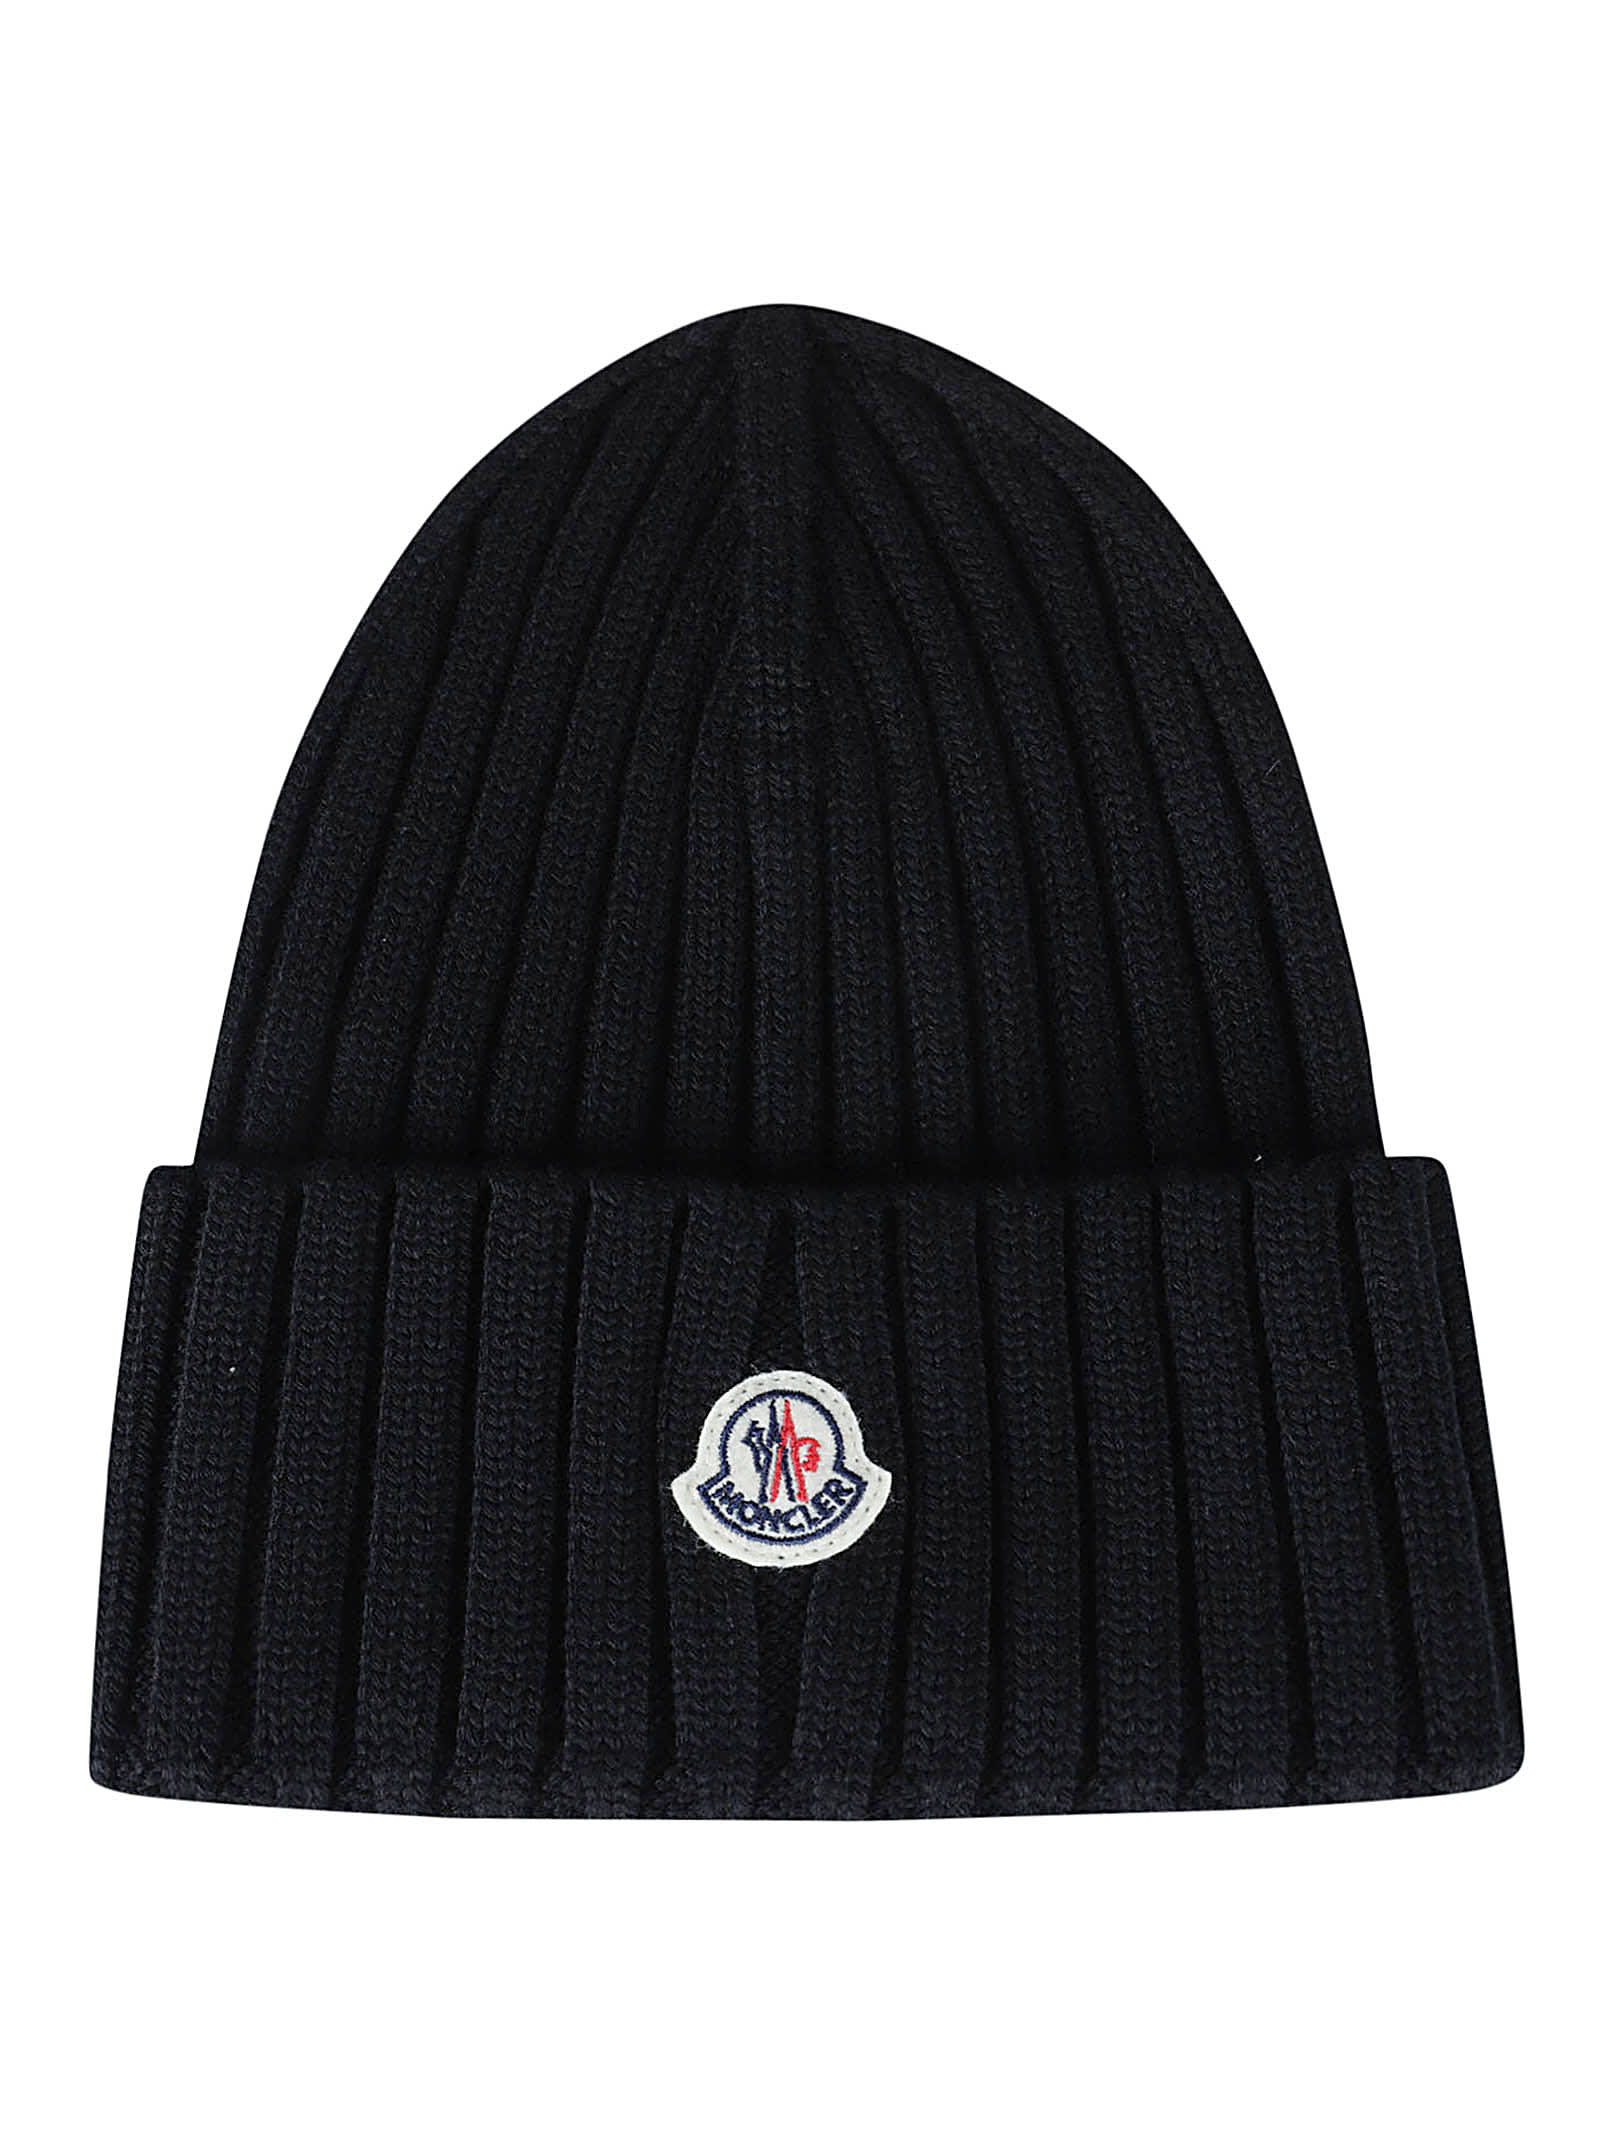 MONCLER LOGO PATCHED KNIT BEANIE